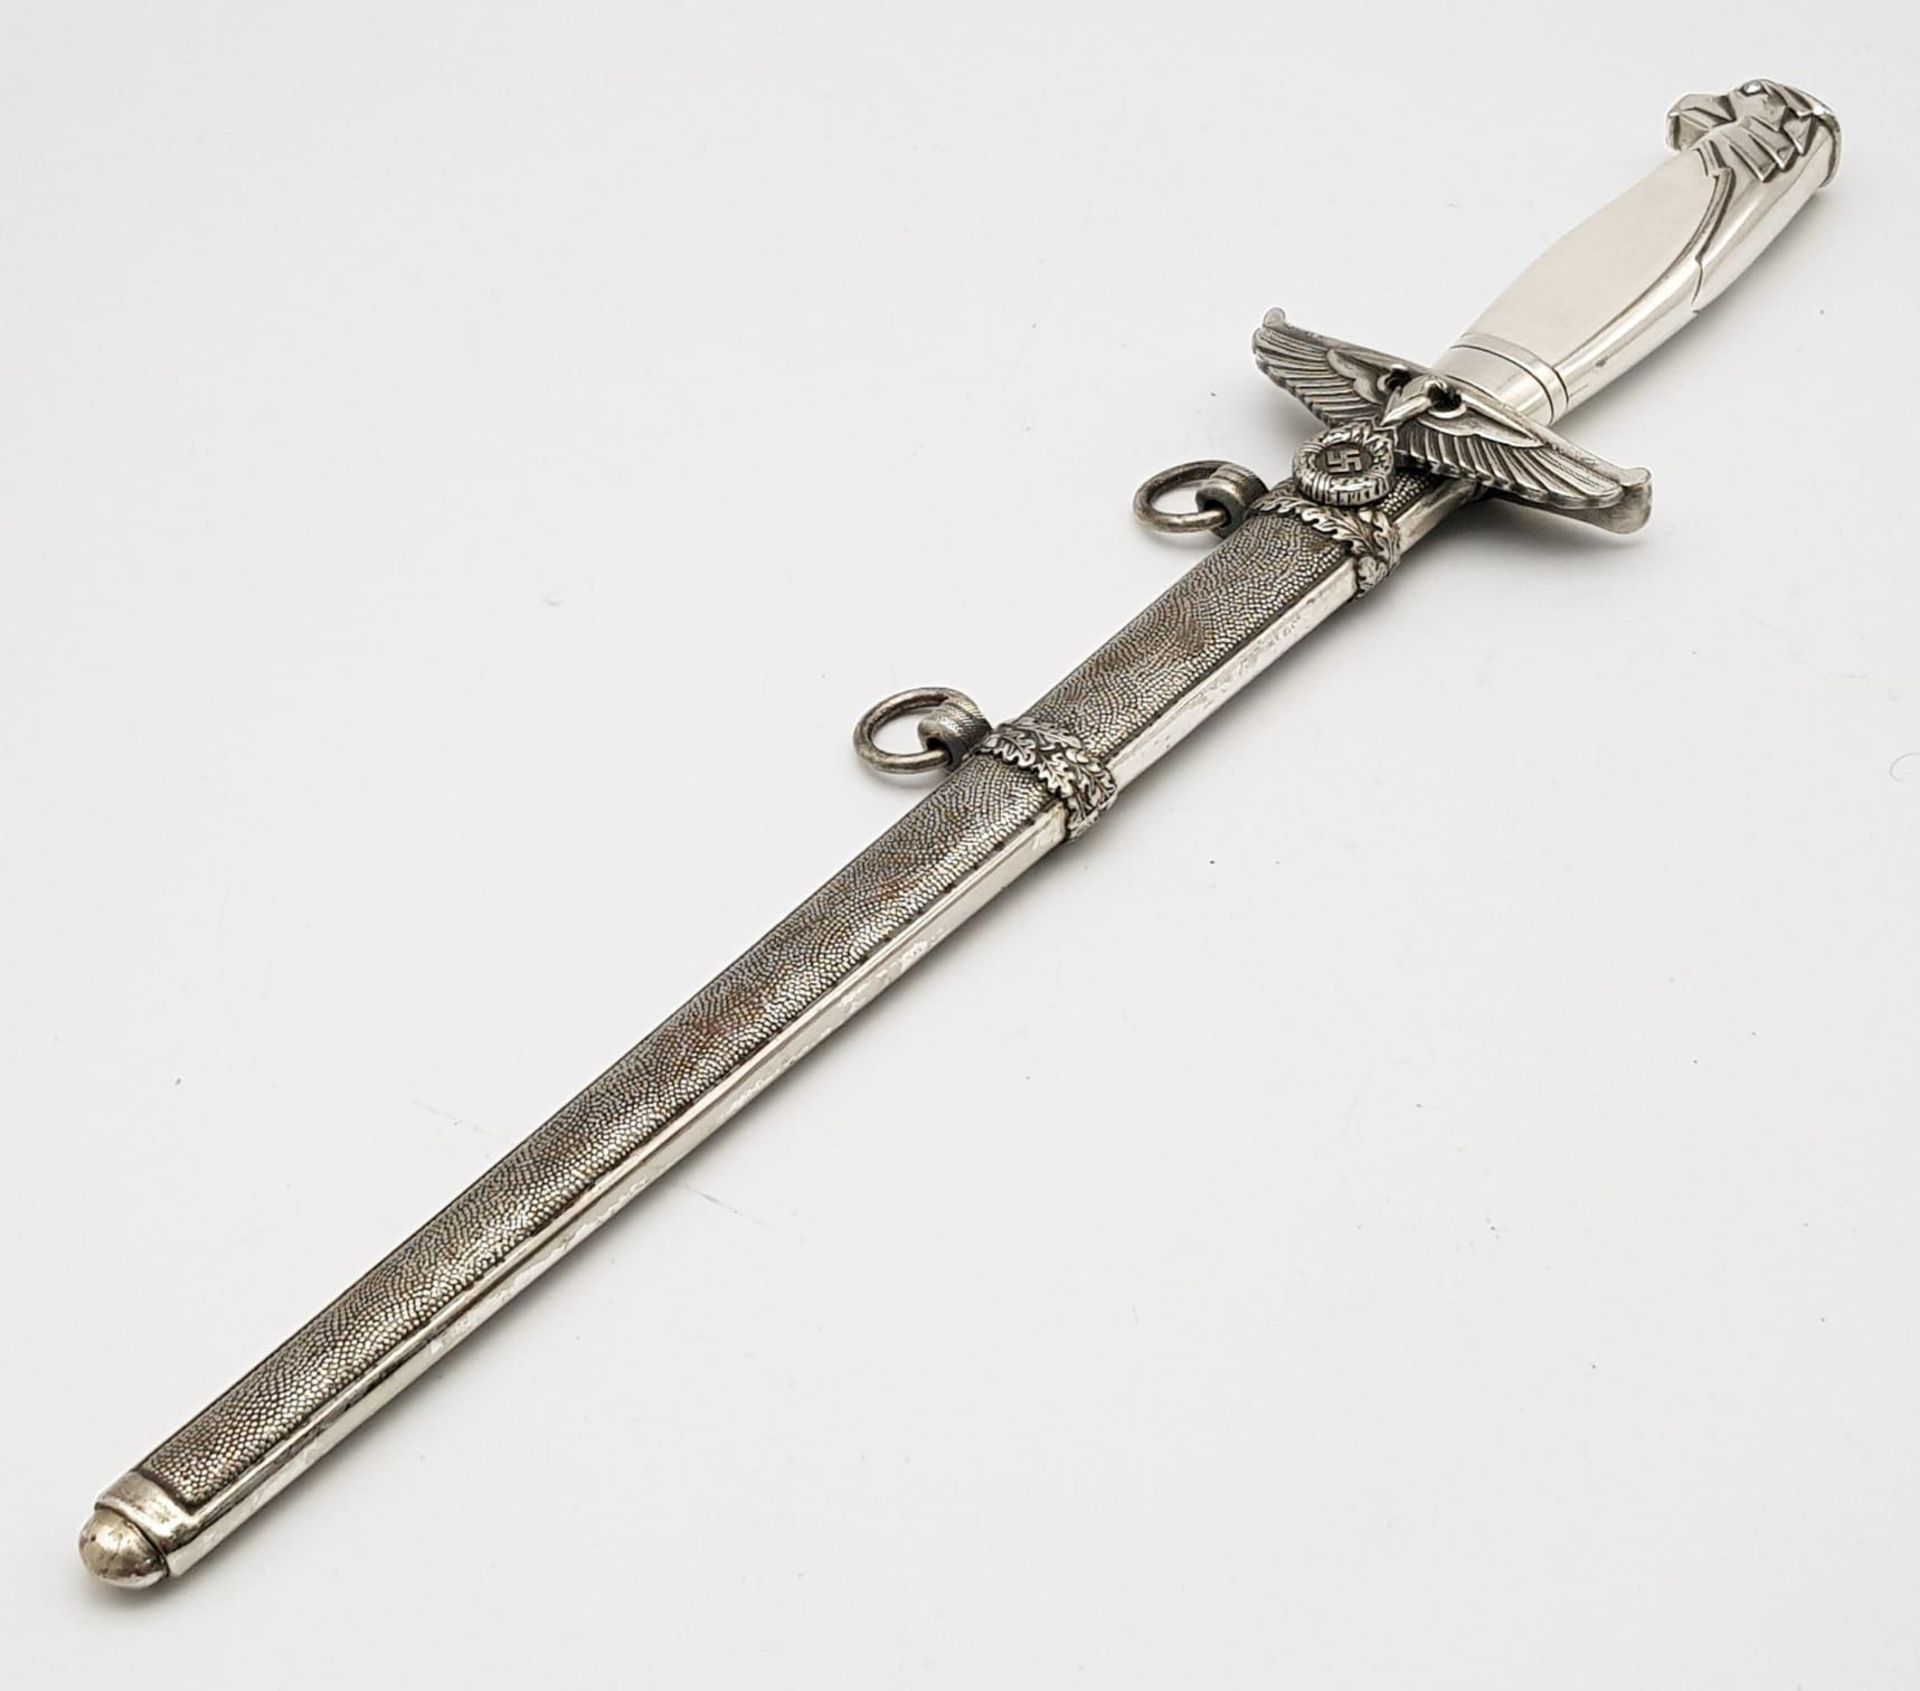 A WW2 German Diplomats Dagger - these stylish daggers had fake mother of pearl handles. This is a - Bild 6 aus 7